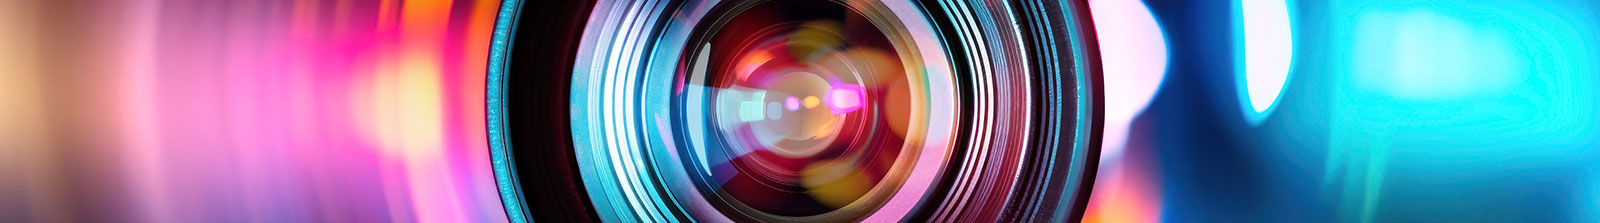 picture of a camera lens apeture